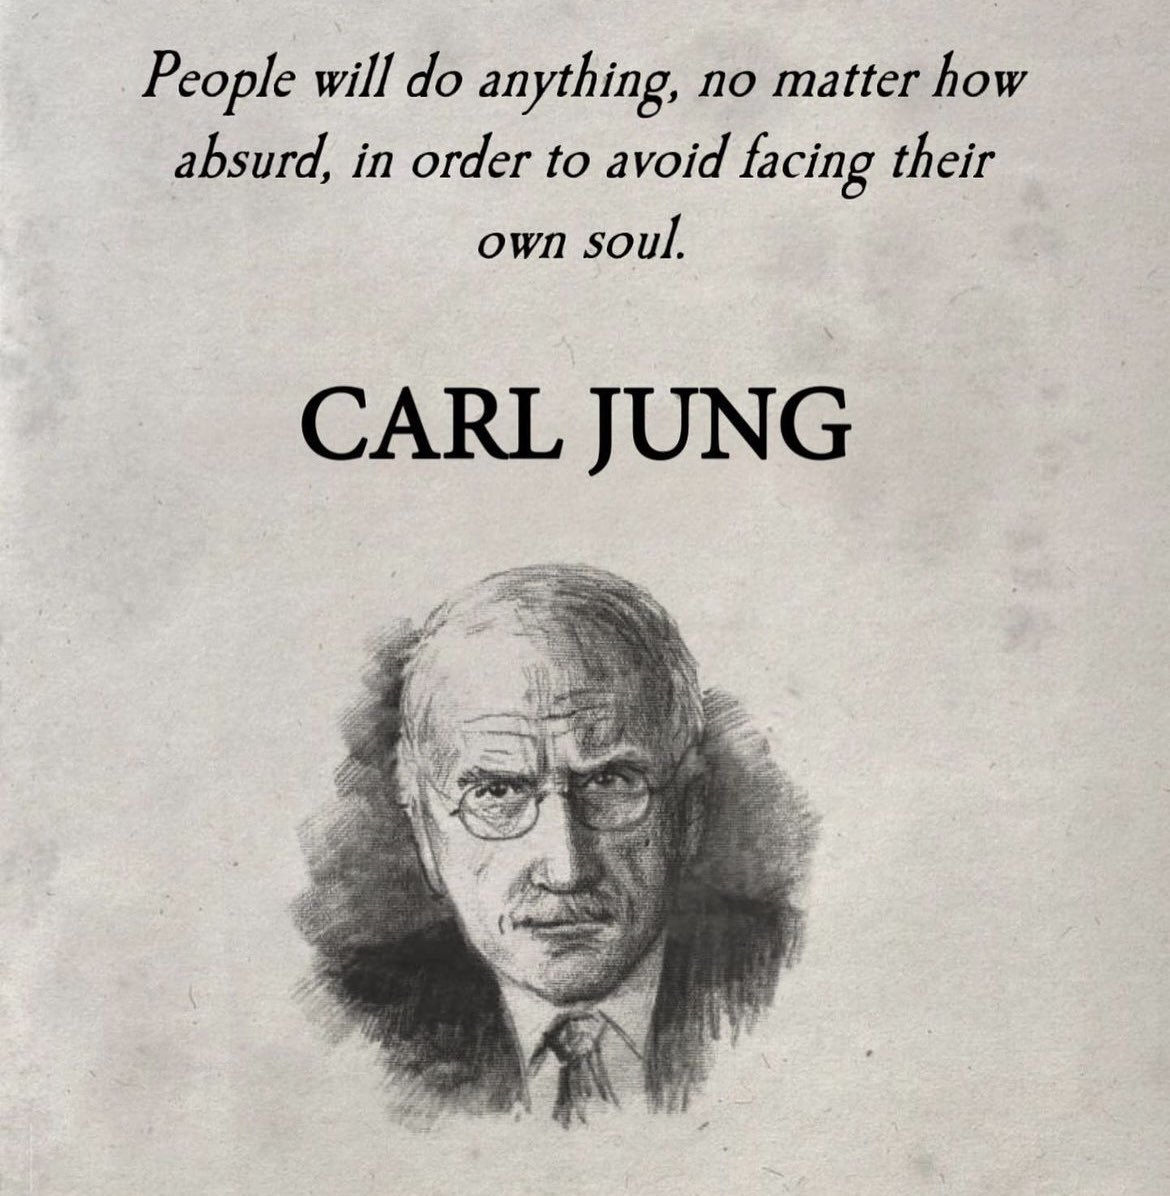 Carl Jung | Psychology and Philosophy 🧠 (@QuoteJung) on Twitter photo 2024-04-10 08:15:30